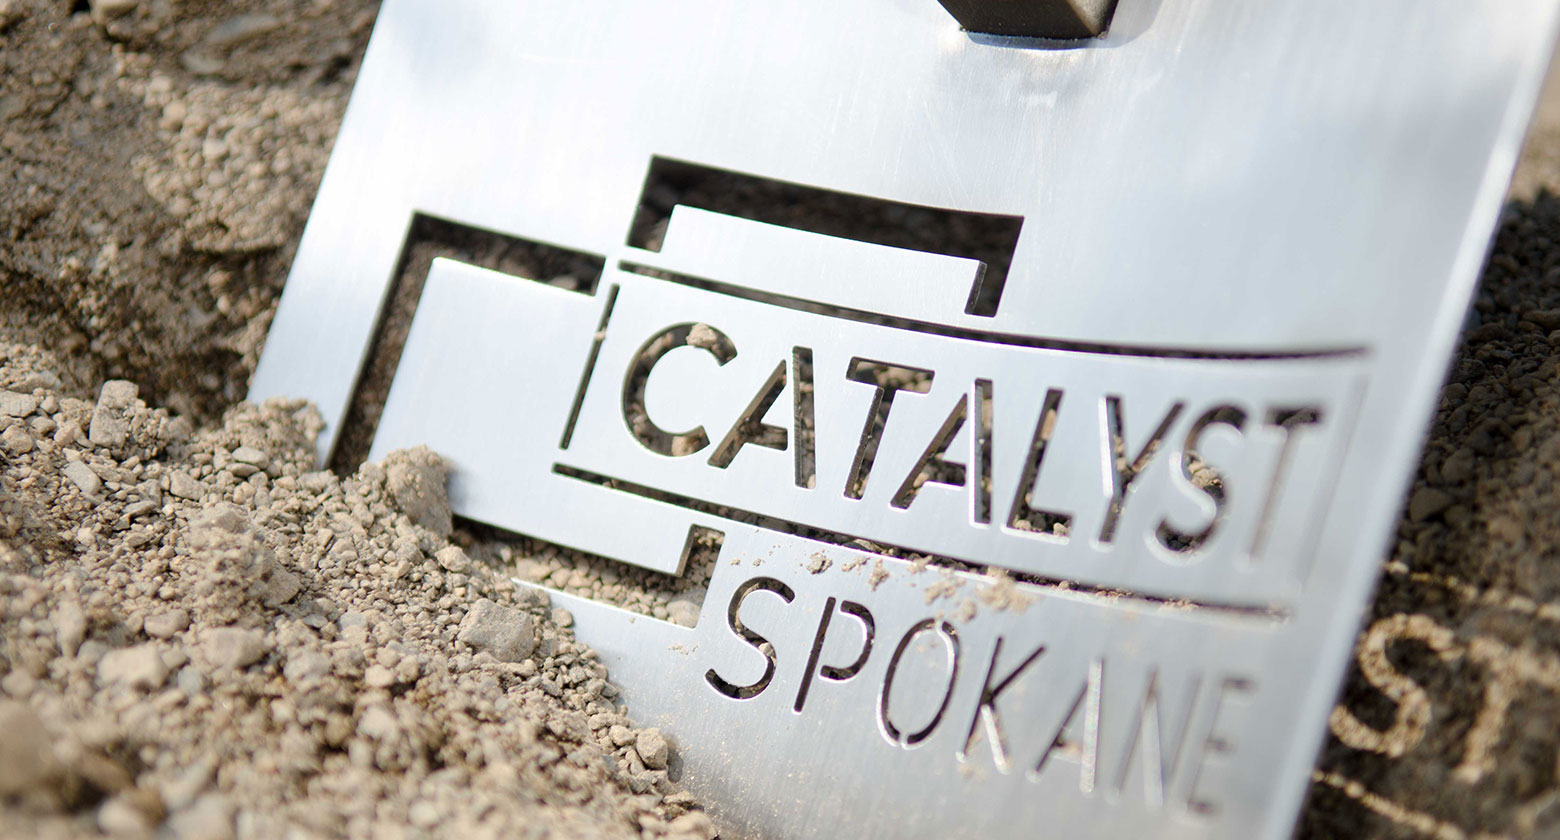 Photo: Shovel with words "CATALYST SPOKANE" digging into dirt